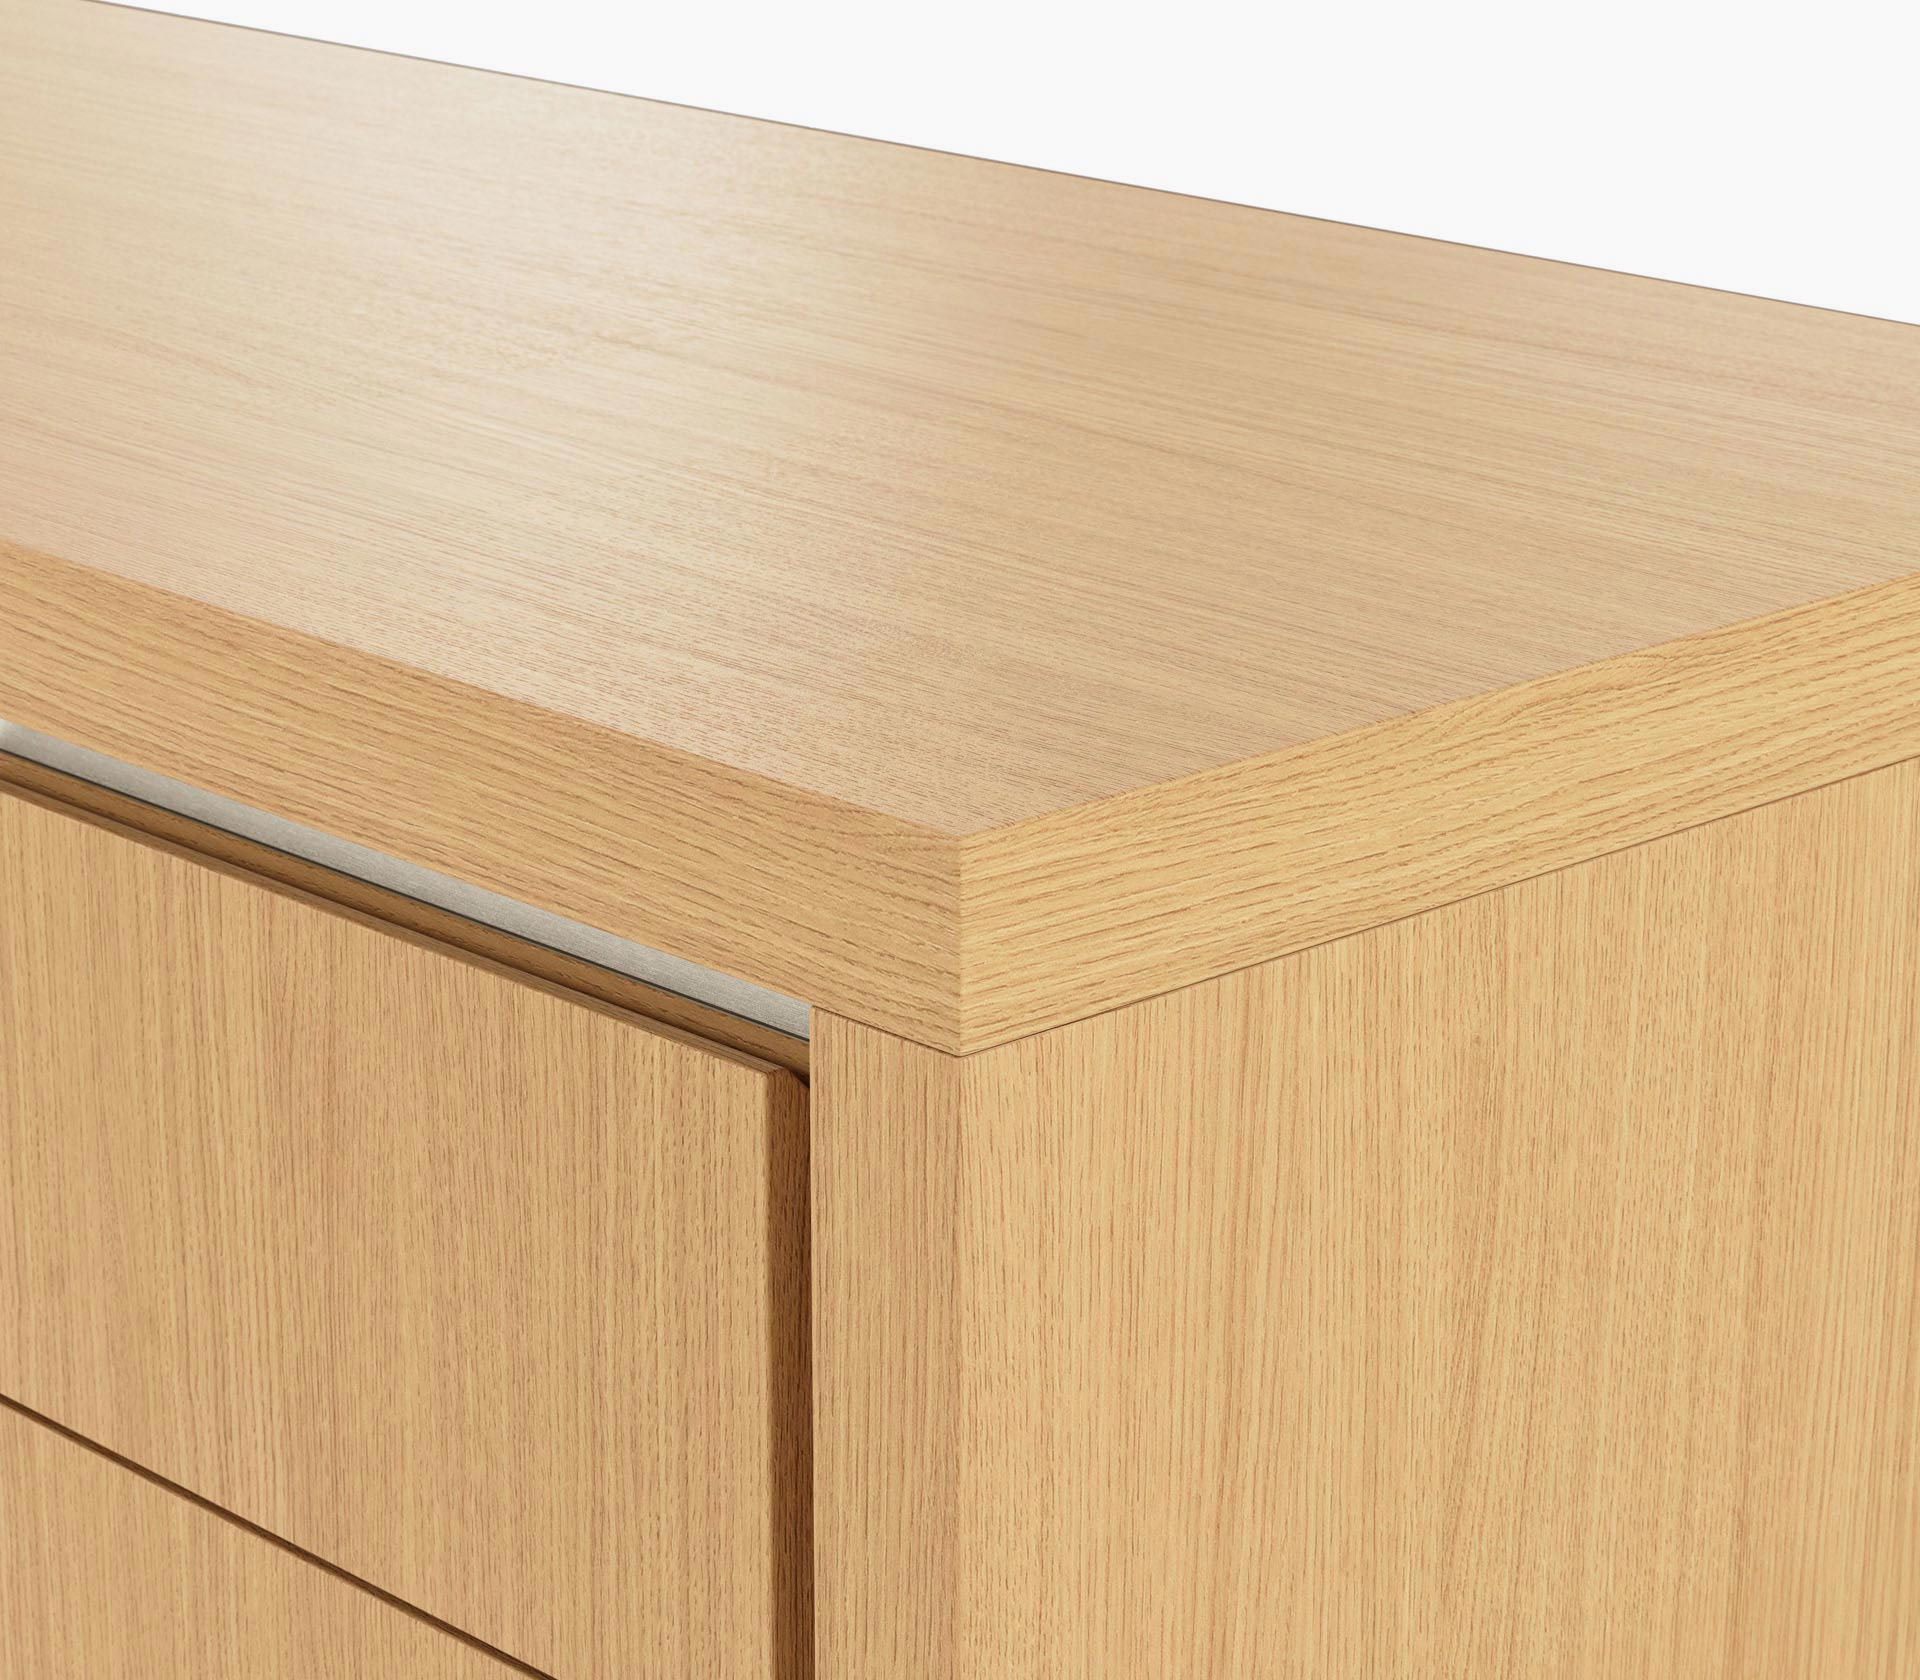 Edge detail on a Highline Fifty Credenza in natural rift cut oak with a satin nickel trim